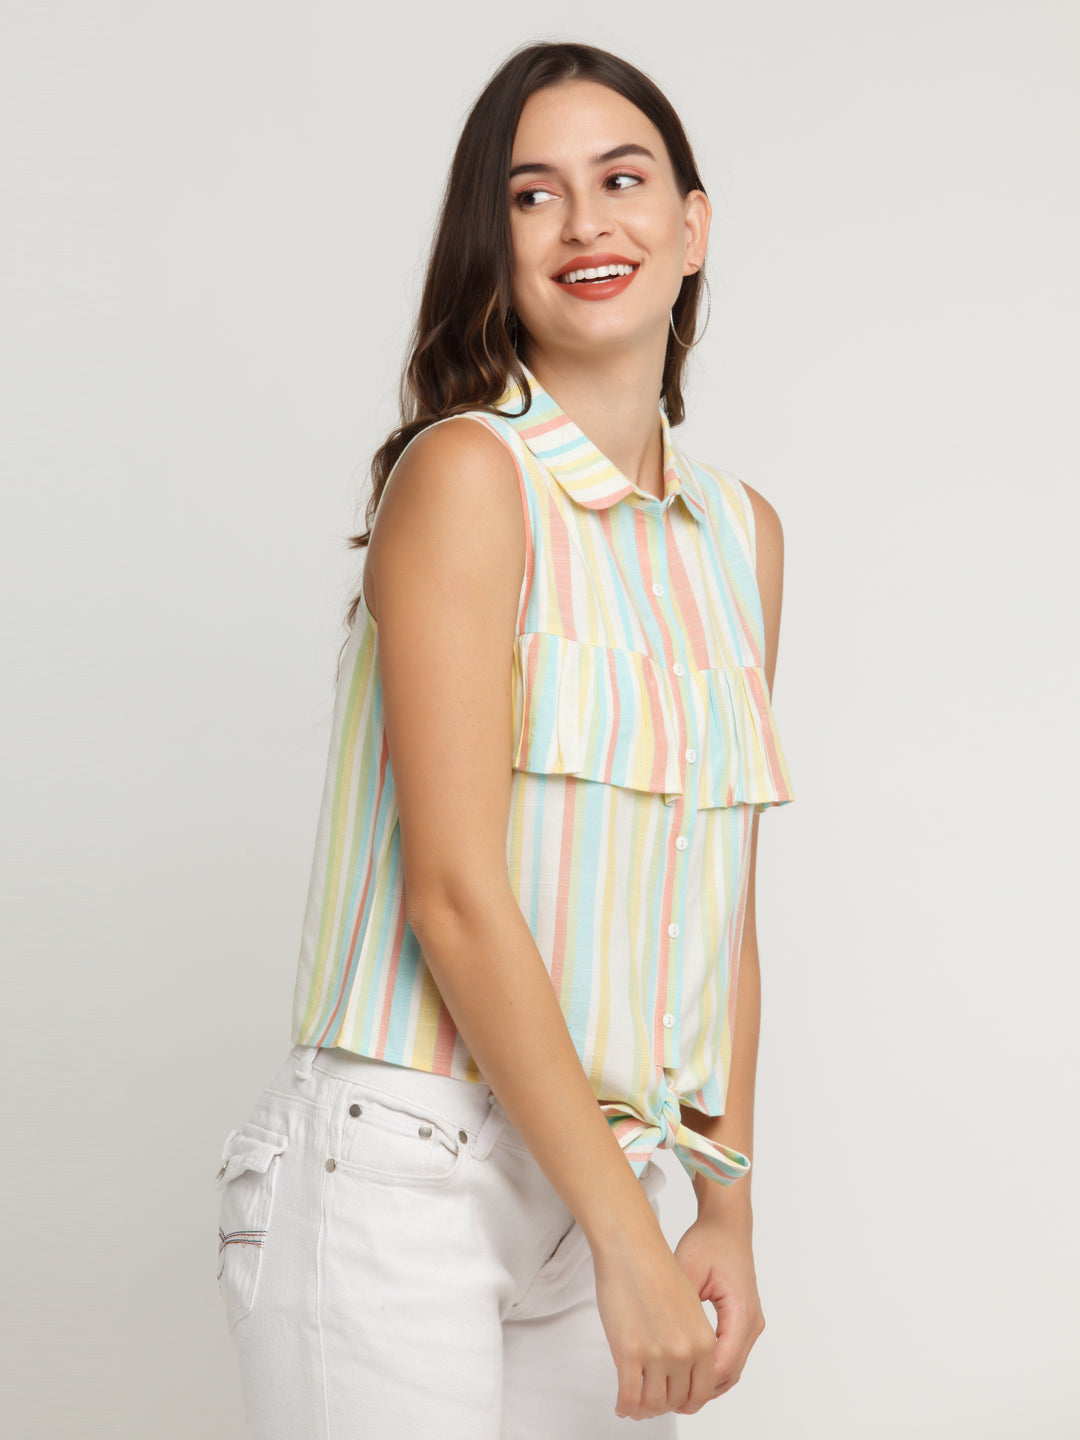 Multicolored Striped Ruffled Shirt For Women